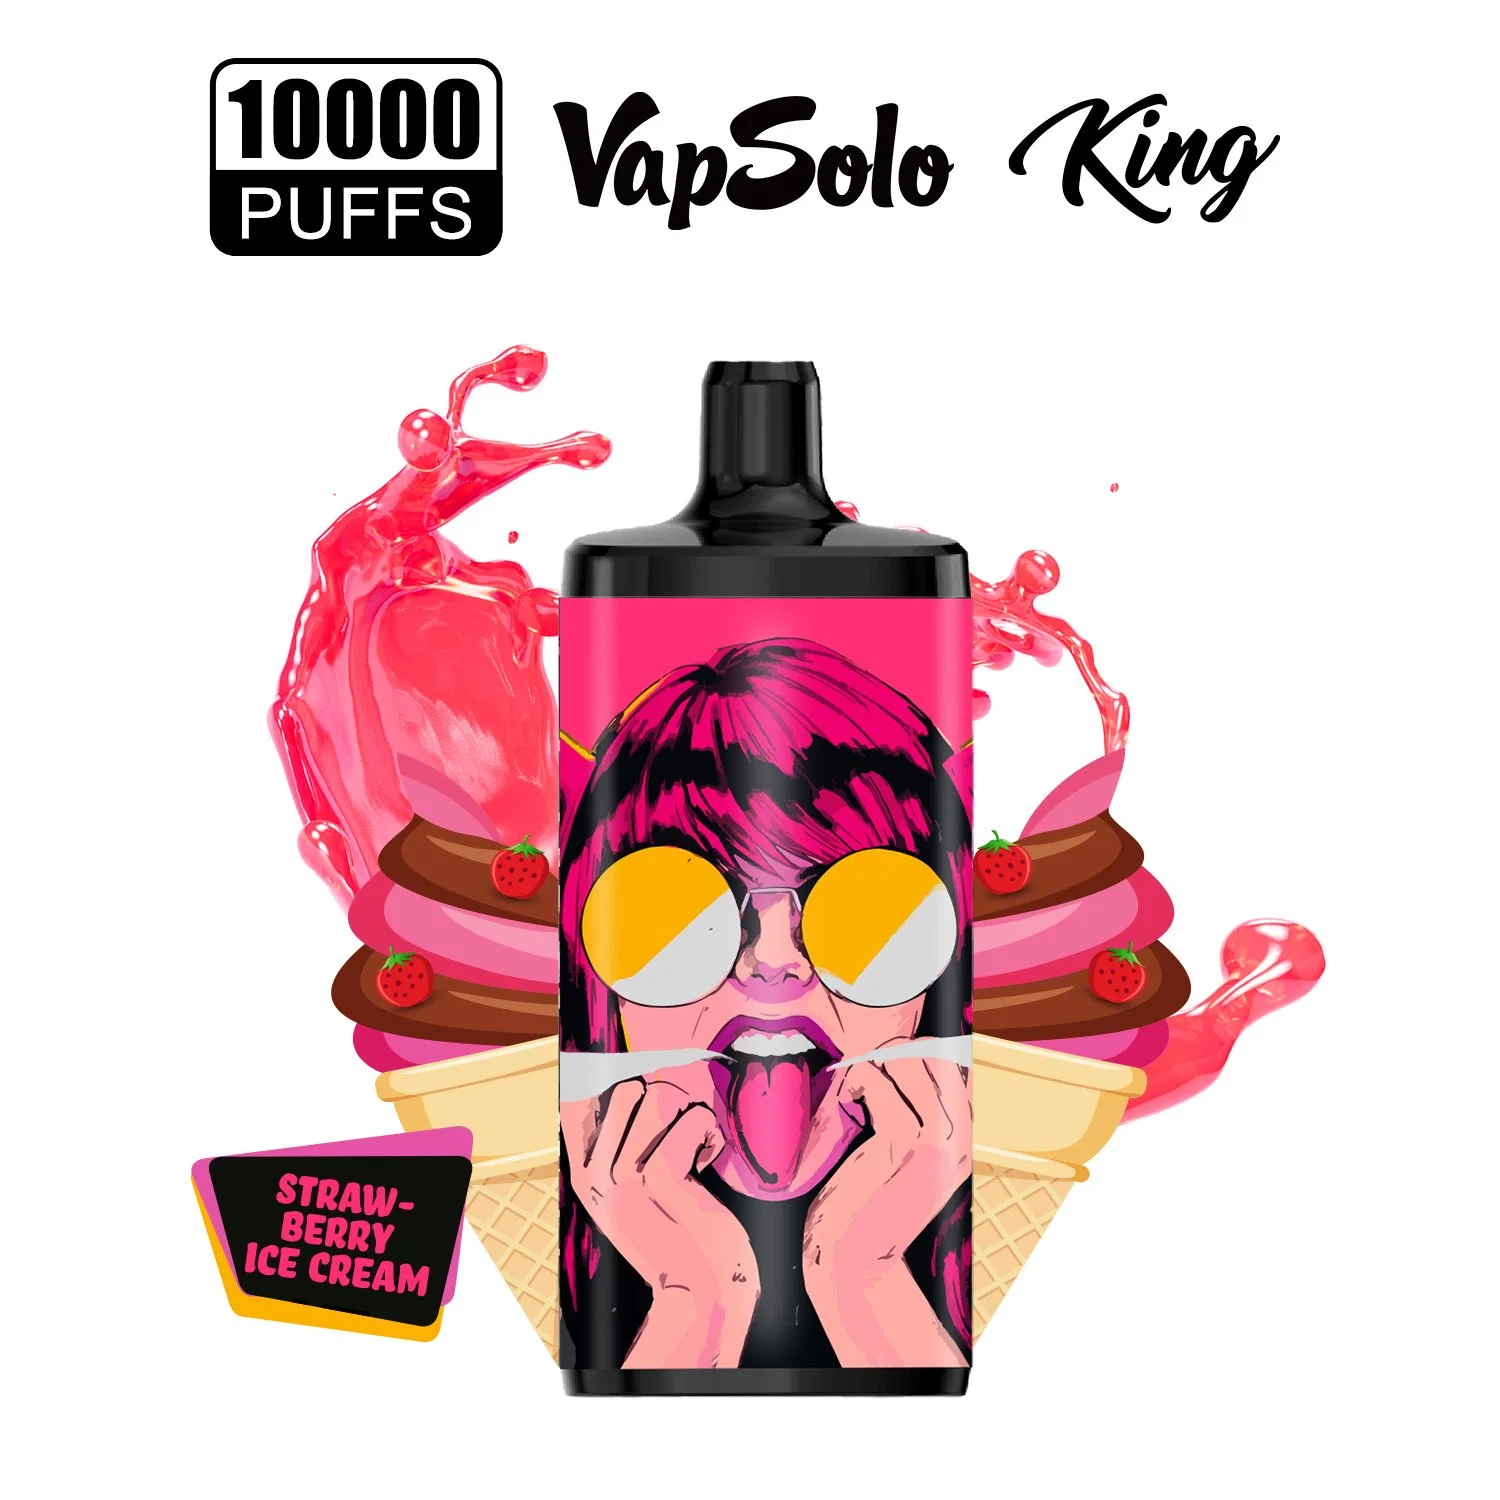 Bang King Vapsolo Latest Disposable/Chargeable Electronic Eigarette King Max 10000 Puffs Randm Tornado 10000 Puffs Disposable/Chargeable Vape